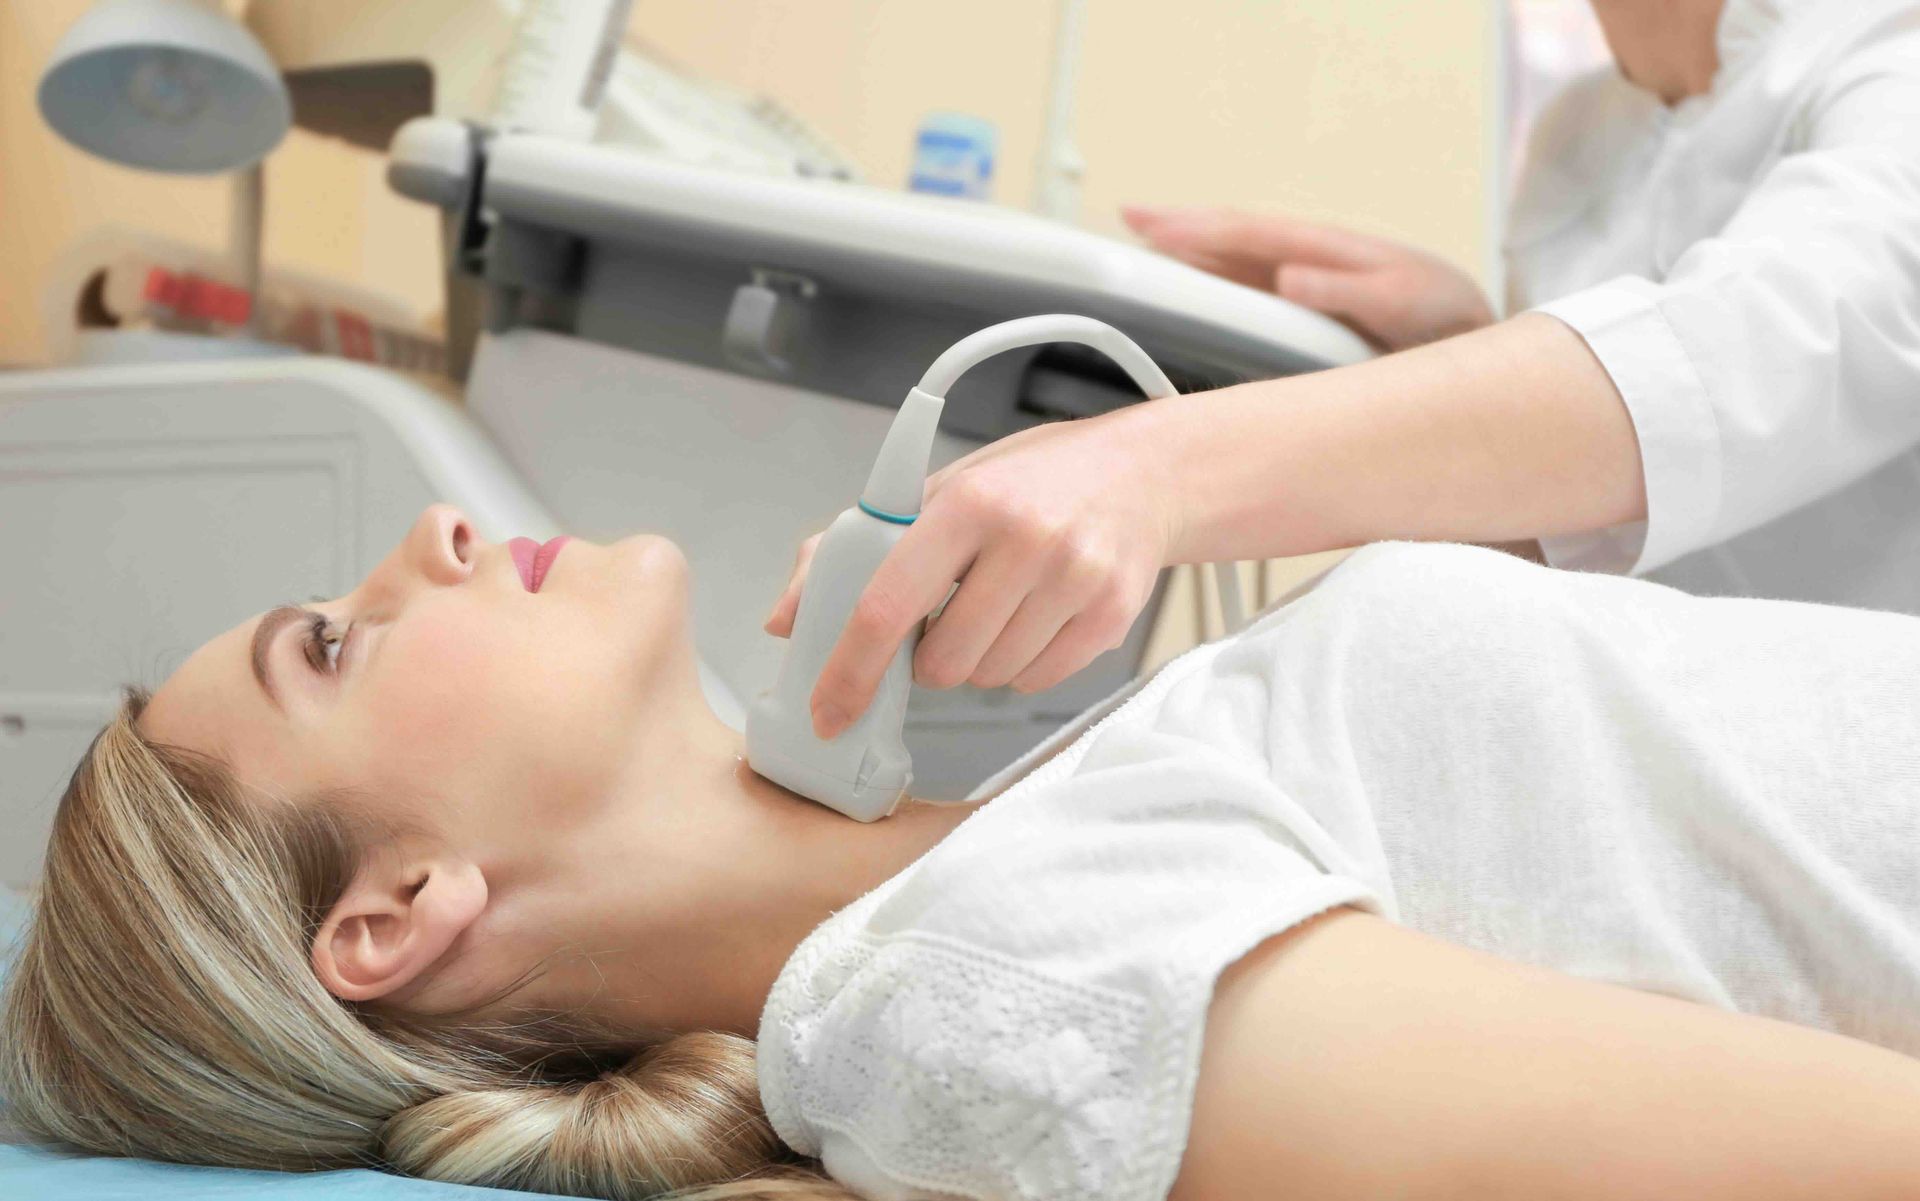 A woman is getting an ultrasound of her neck.